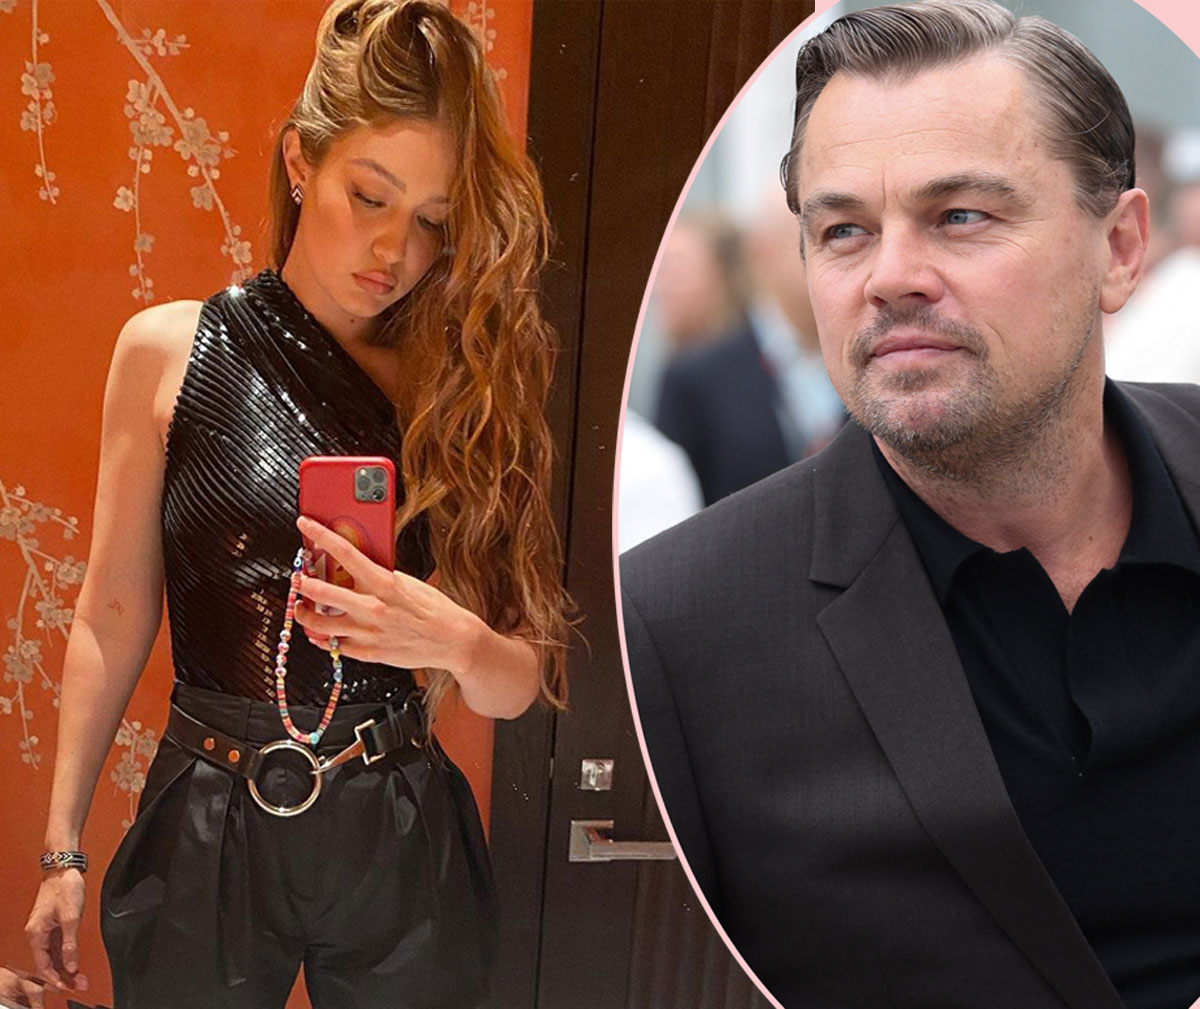 Leonardo DiCaprio &amp; Gigi Hadid Still ‘Have Fun’
Together Despite His Recent Outing With Another Model